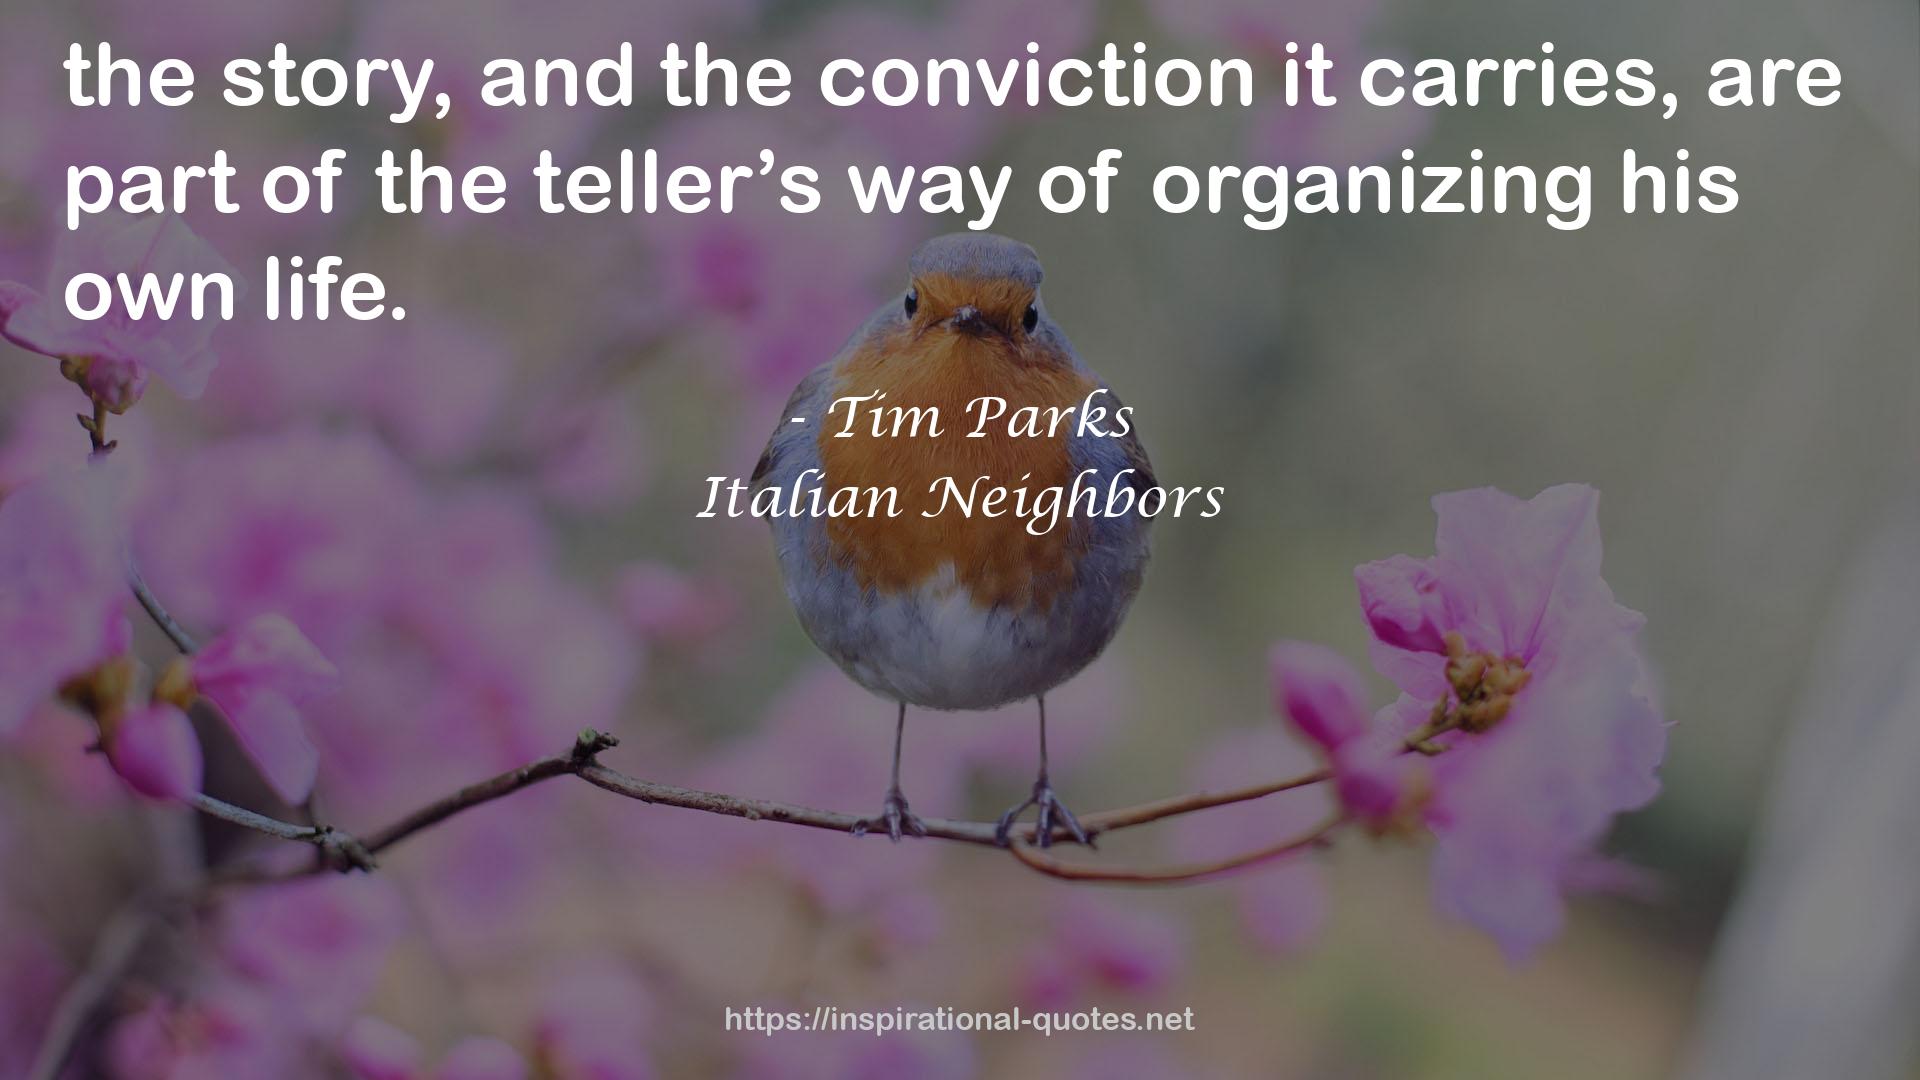 Tim Parks QUOTES